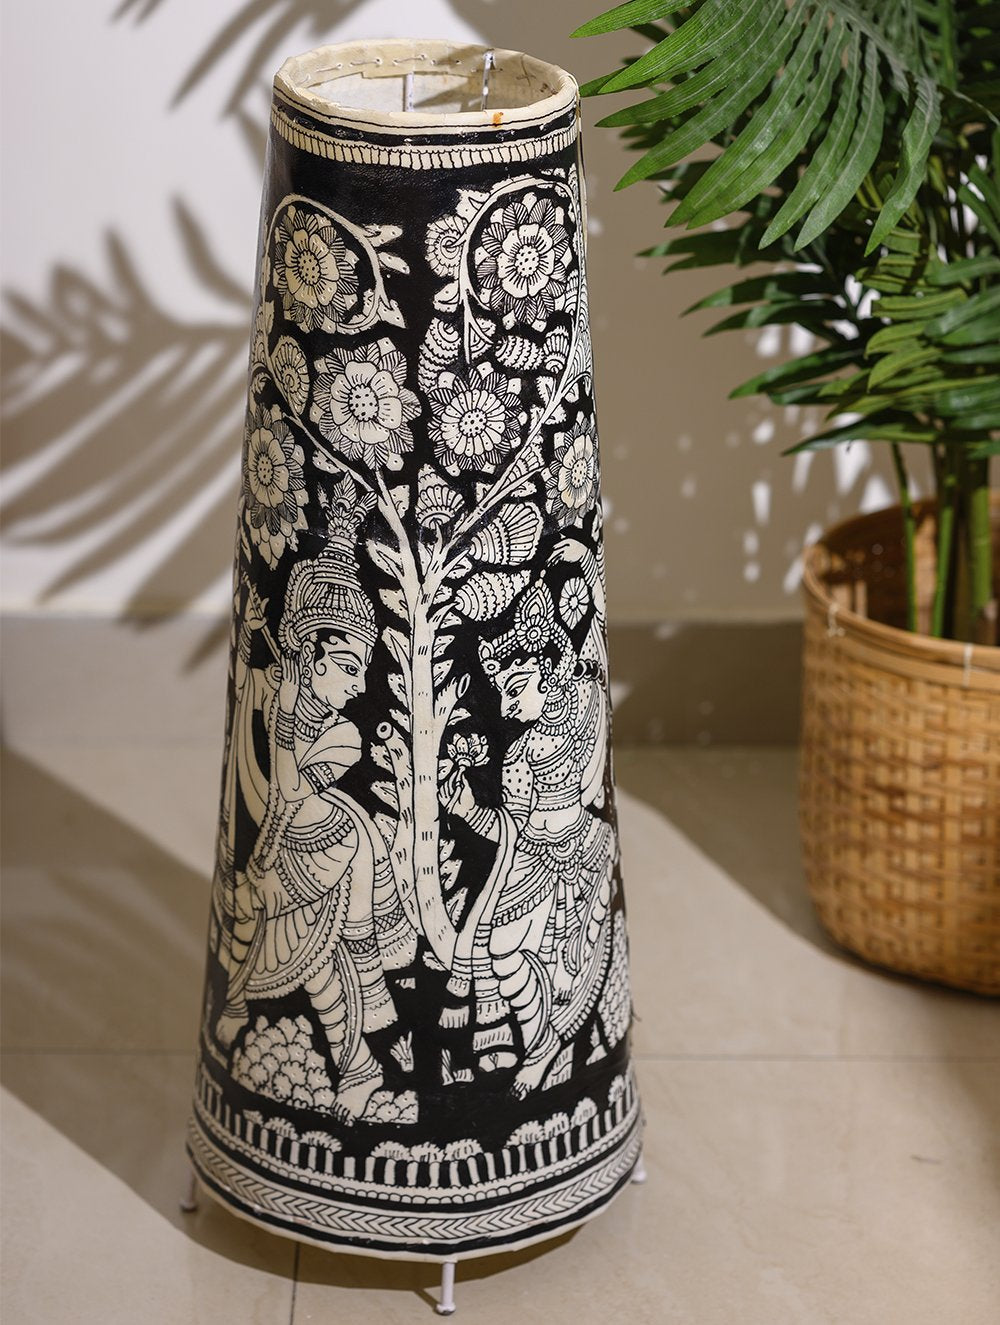 Load image into Gallery viewer, Andhra Leather Craft - Floor Lamp Shade (Large) - Radha Krishna